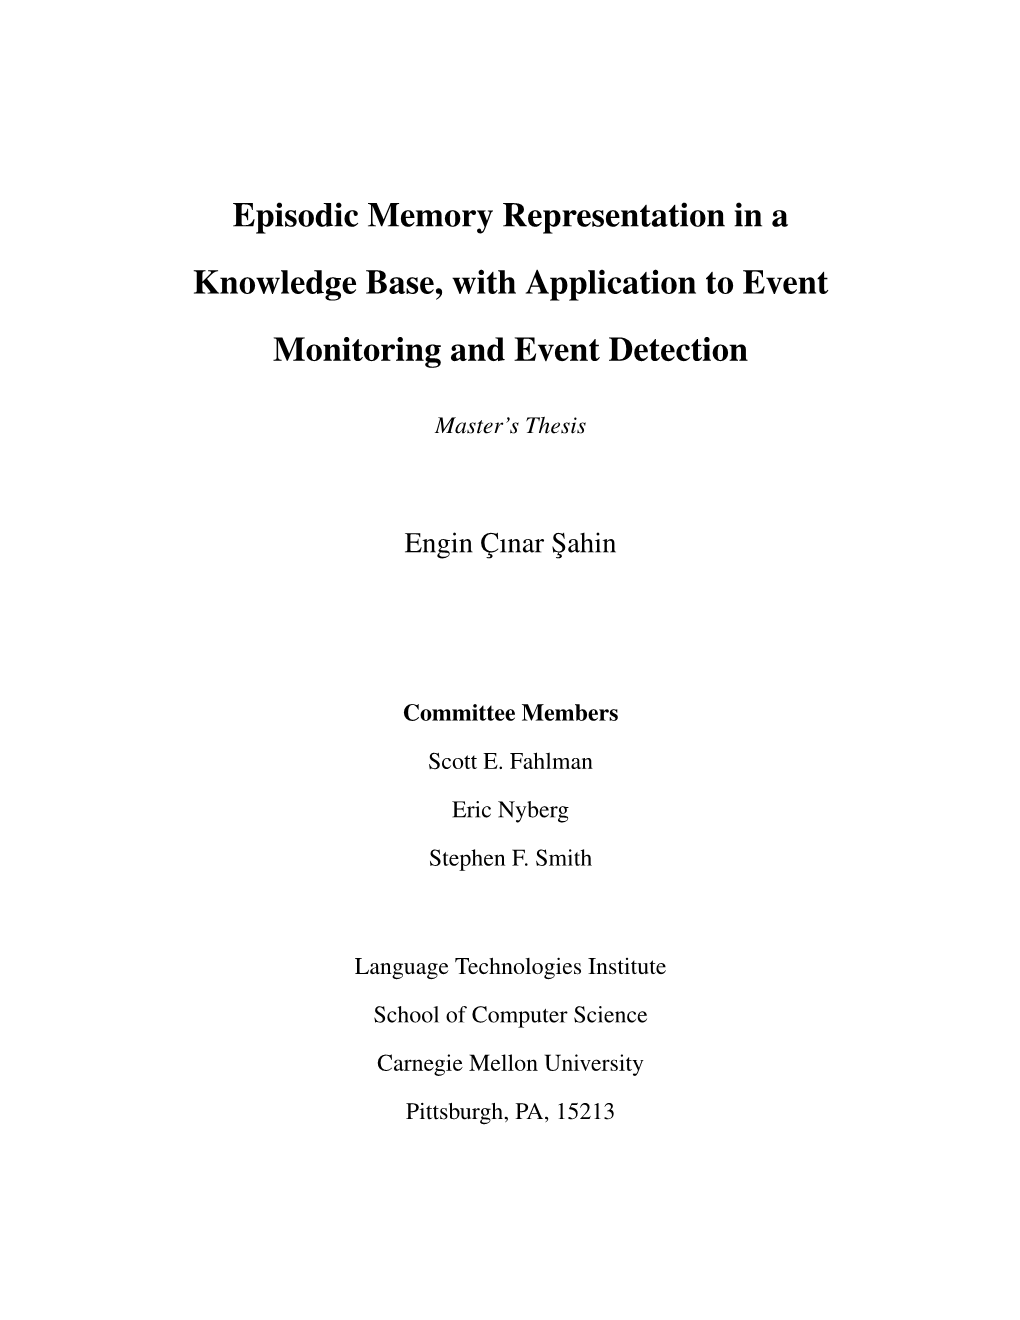 Episodic Memory Representation in a Knowledge Base, with Application to Event Monitoring and Event Detection